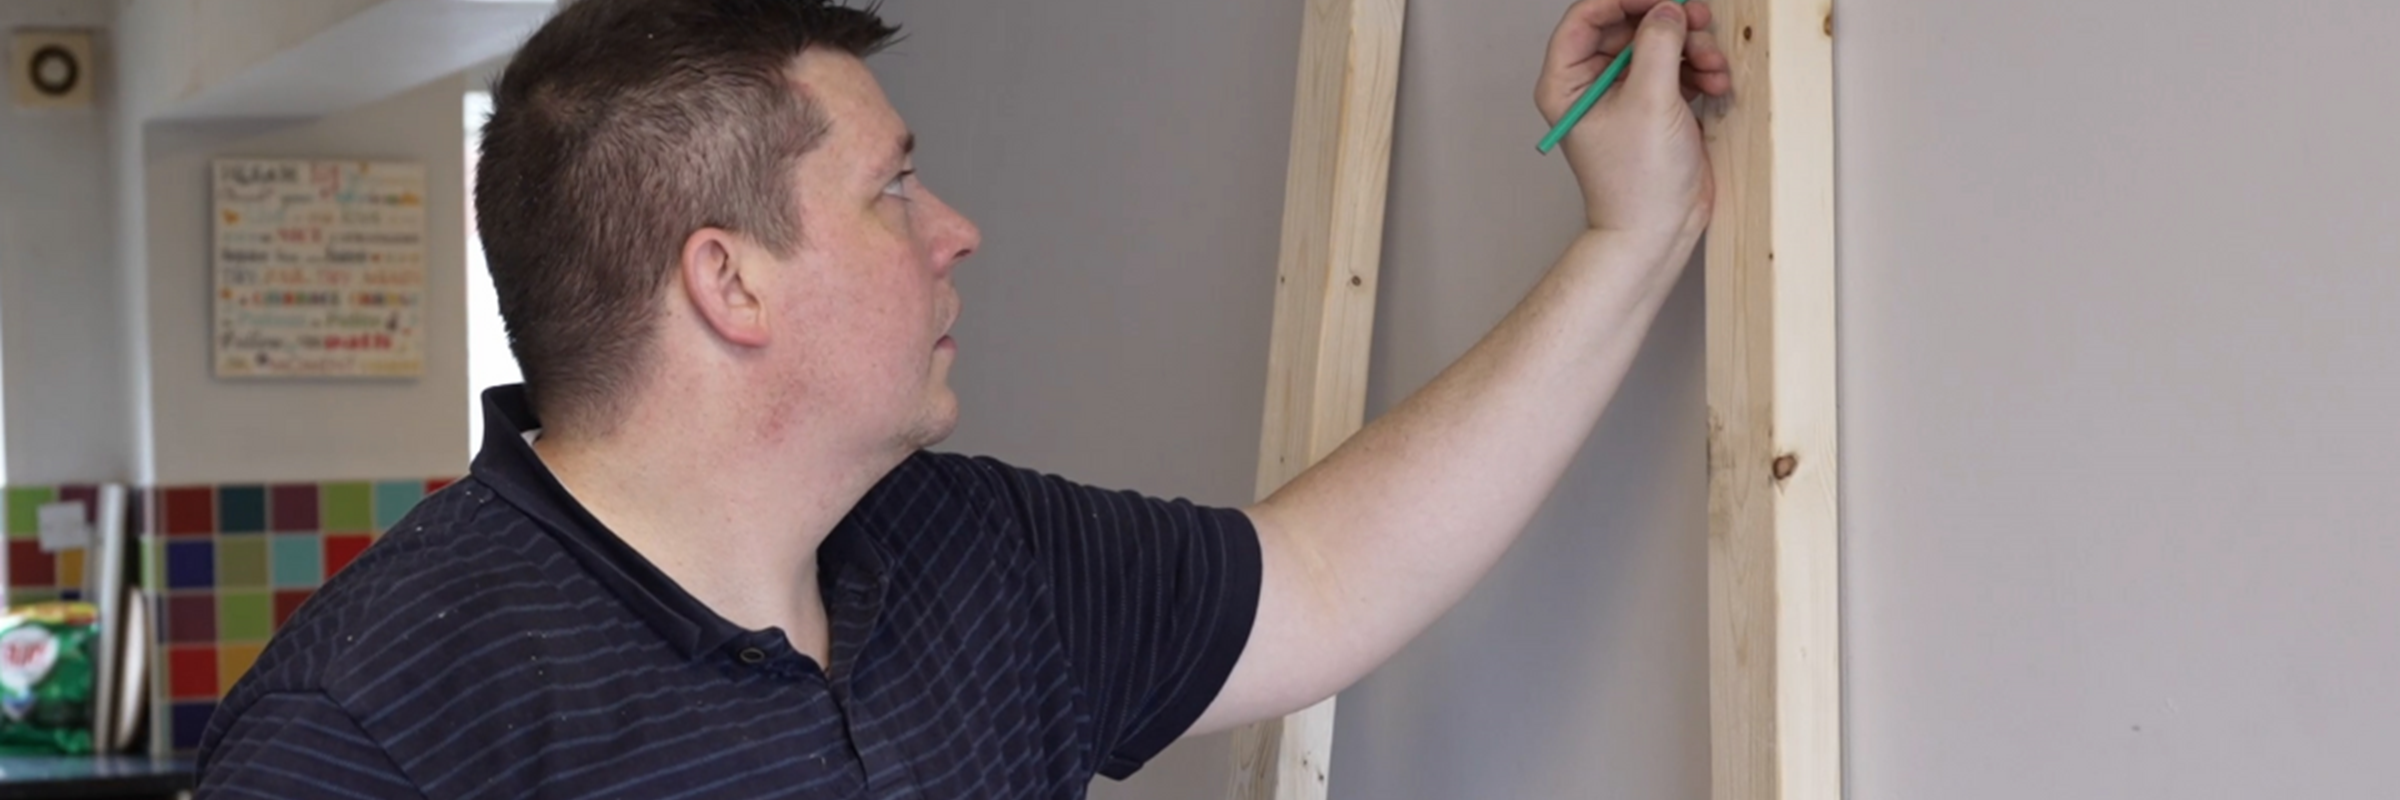 GM foster carer doing building and decorating work in a room